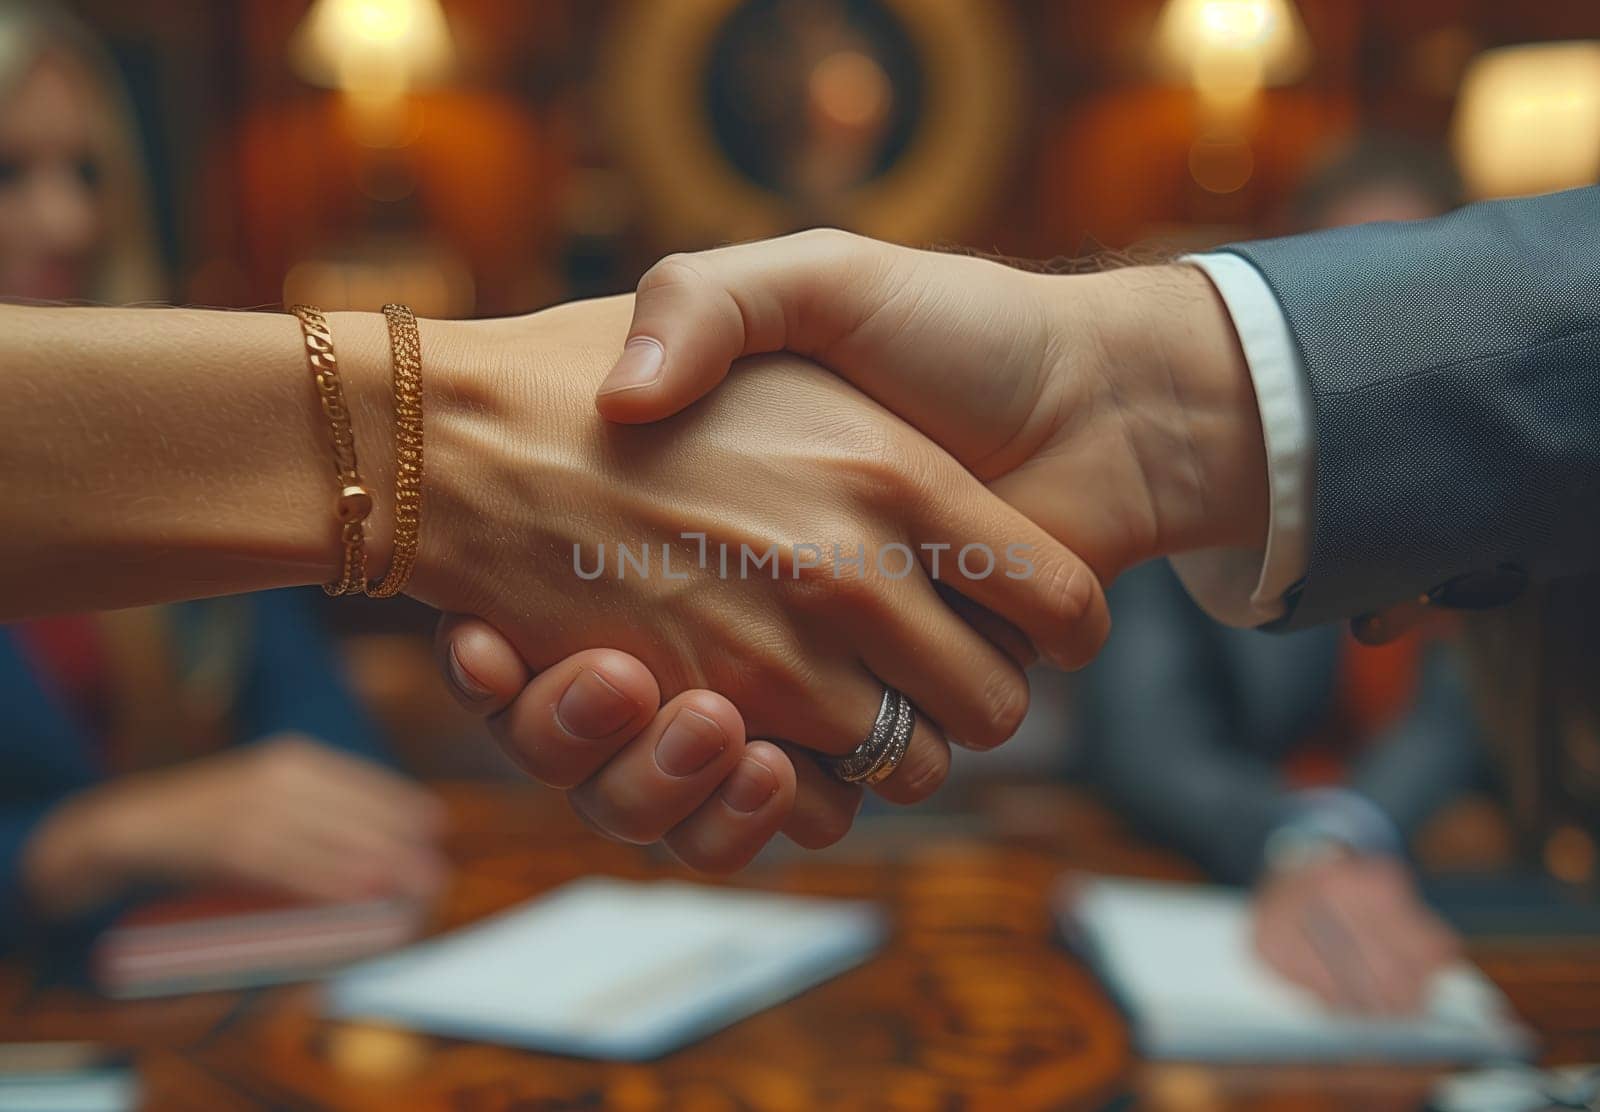 The man and woman are making a gesture of shaking hands across the table, showcasing their intertwined fingers, thumbs, and nails